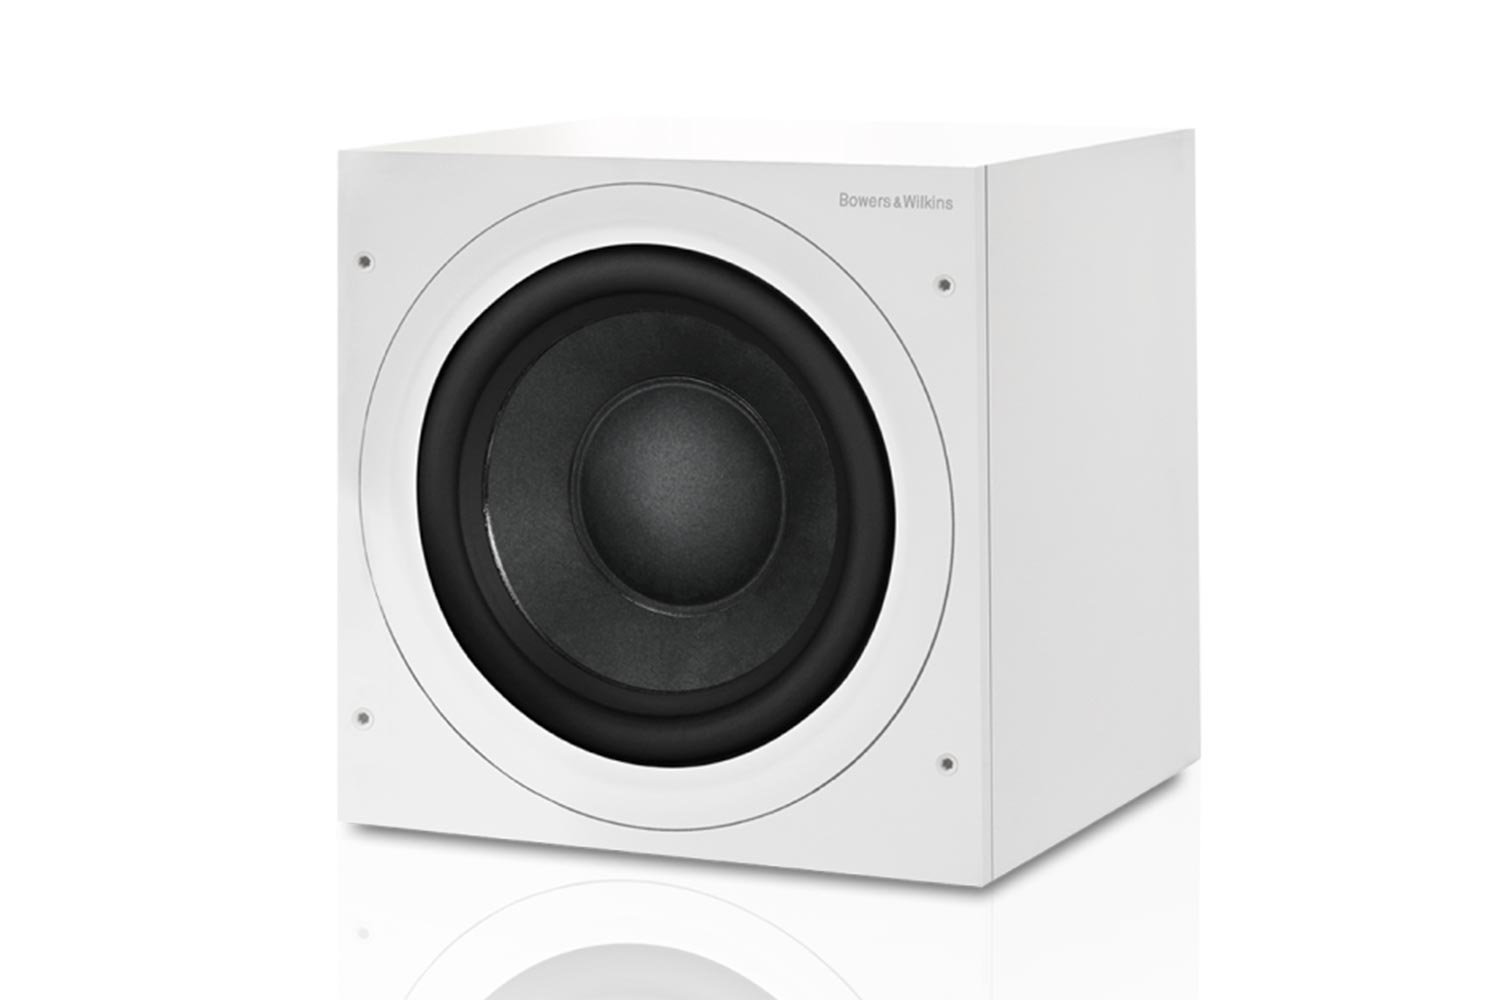 Bowers & Wilkins ASW610 weiss